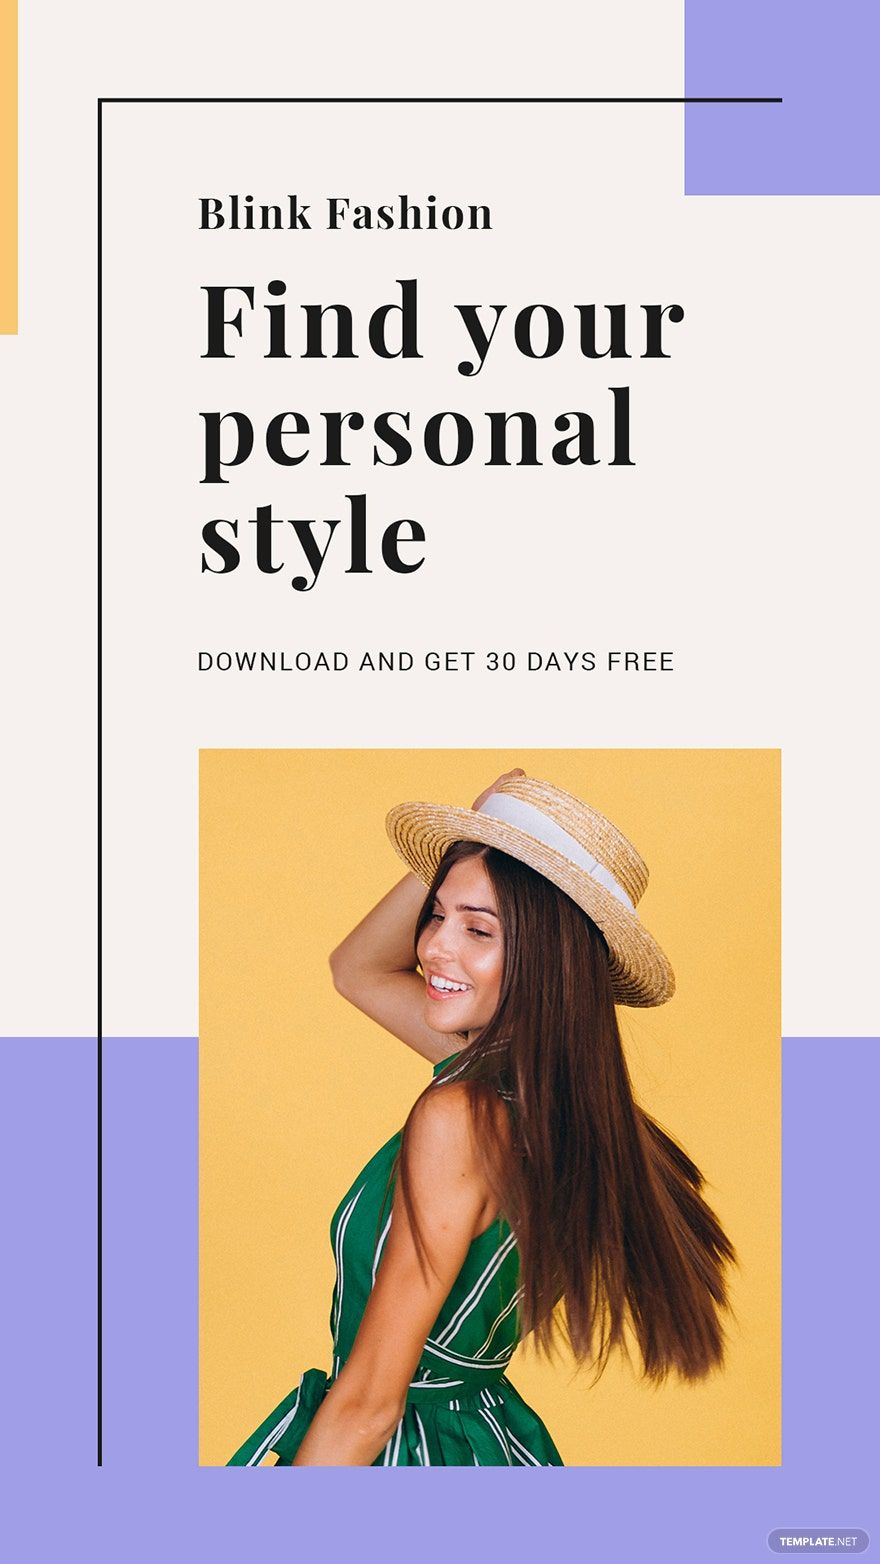 Fashion Brands App Promotion Instagram Story Template